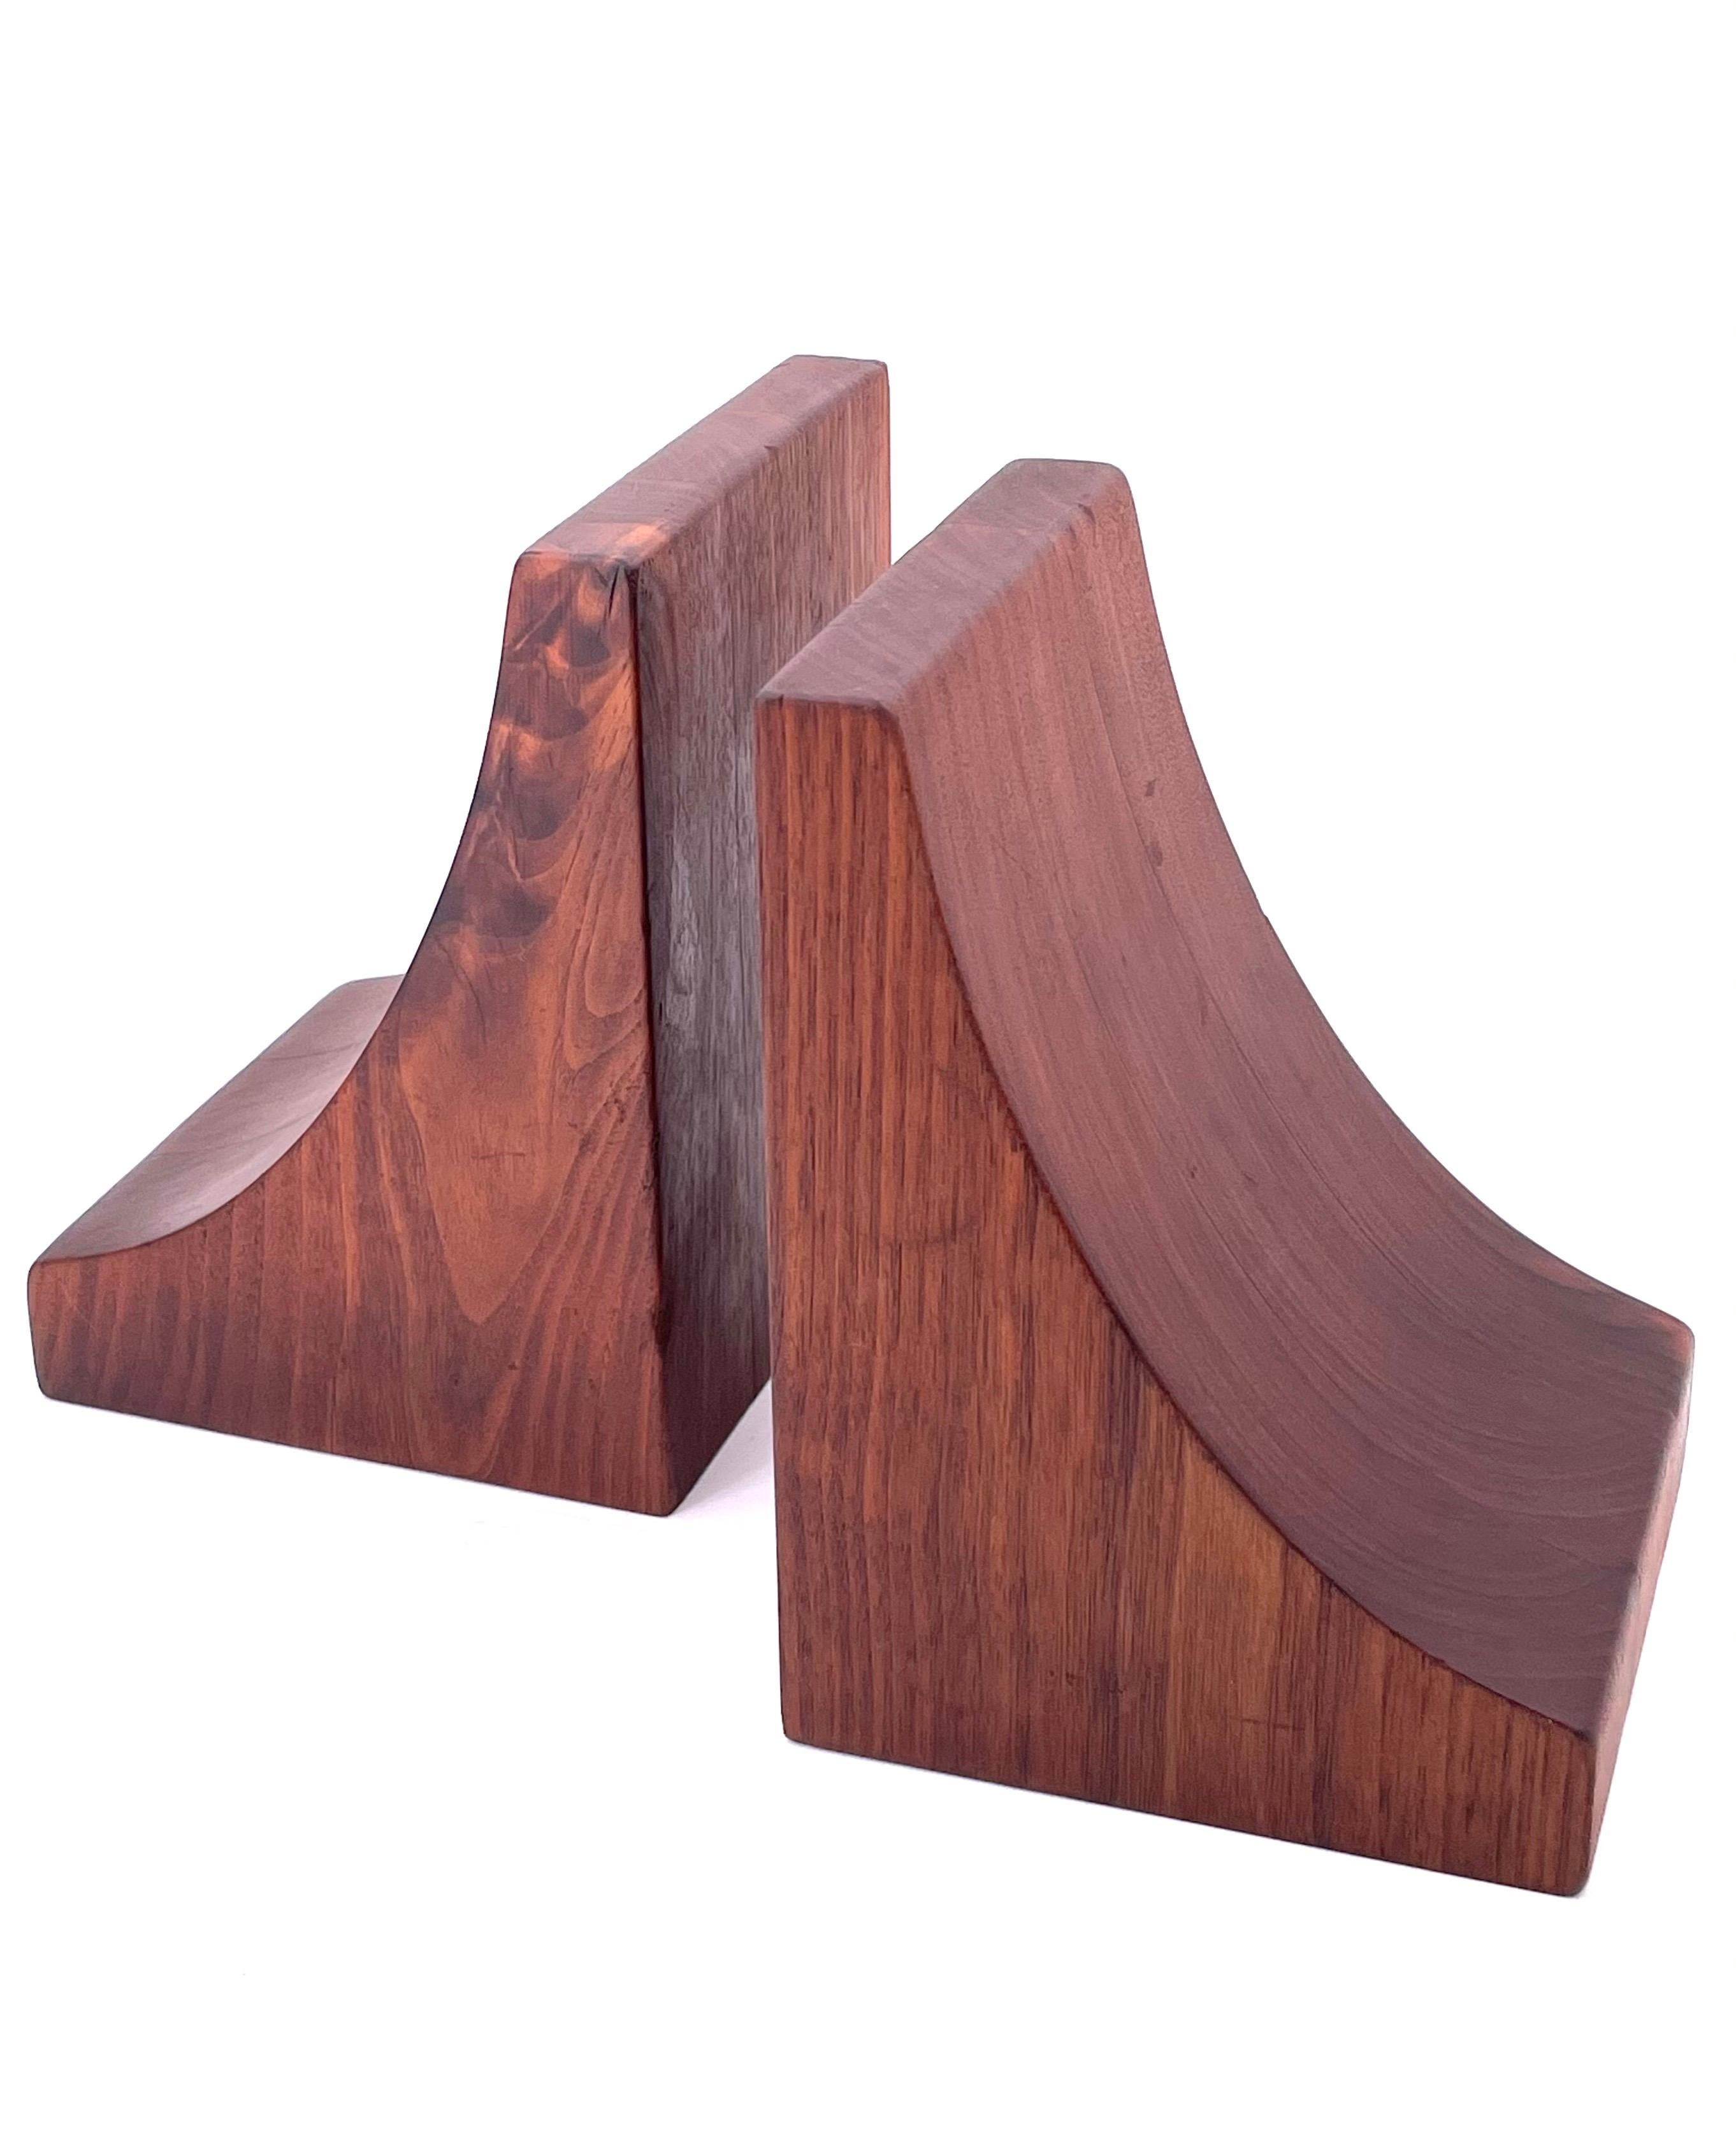 A beautiful and unique pair of organic shapes of solid walnut blocks bookends, in the style of Don Shomaker.